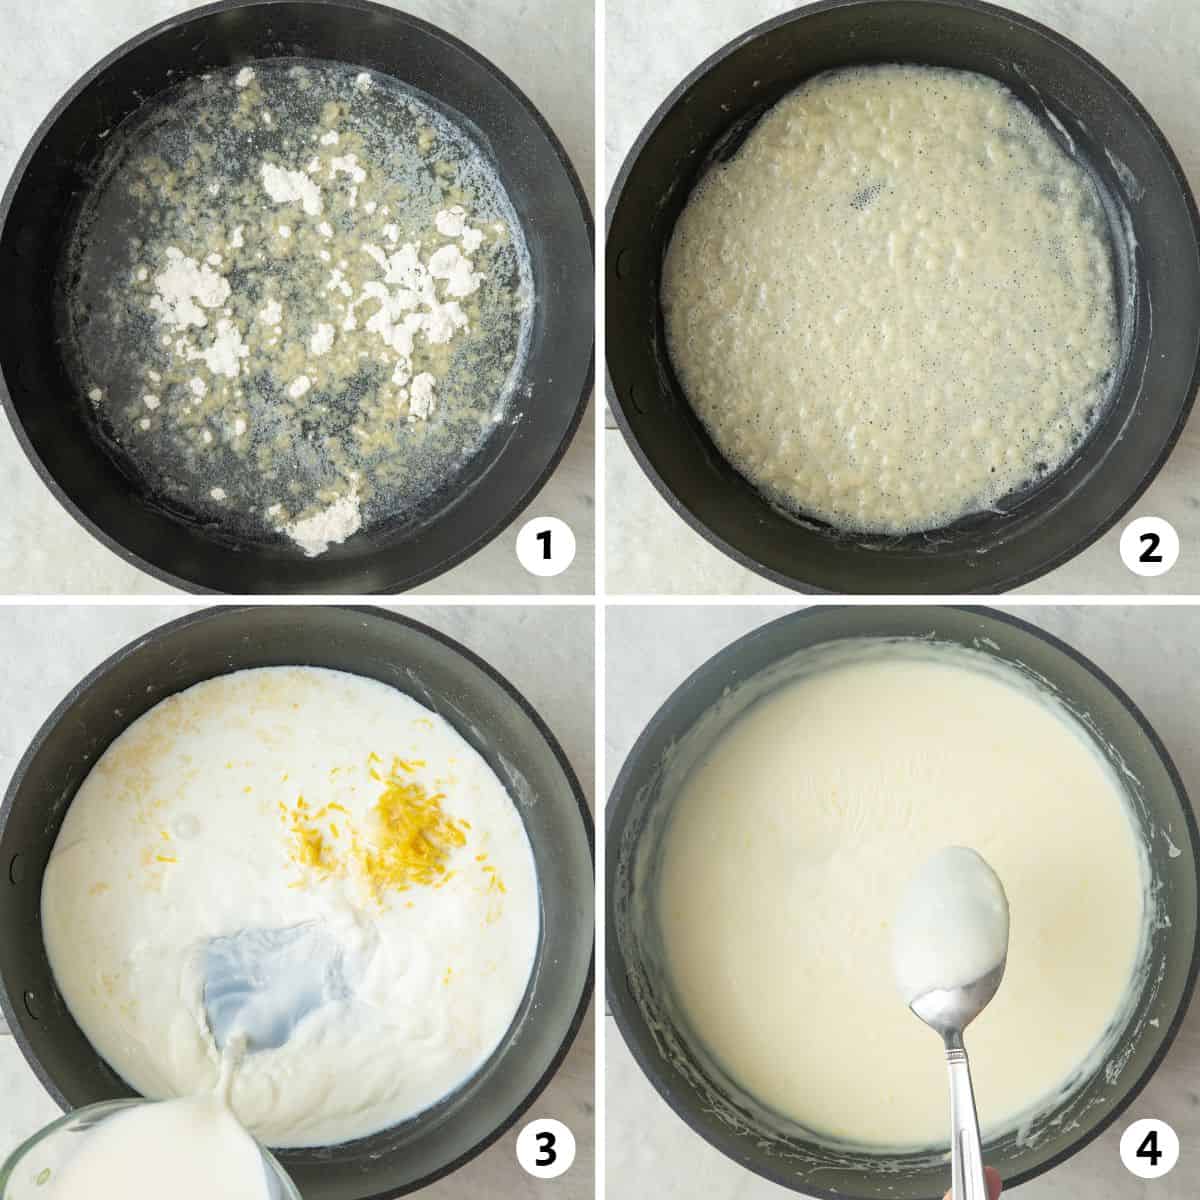 4 image collage making sauce: 1-melted butter and flour sprinkled in a pan, 2- roux after browning lightly, 3- milk and lemon zest added, 4- sauce after thickened.